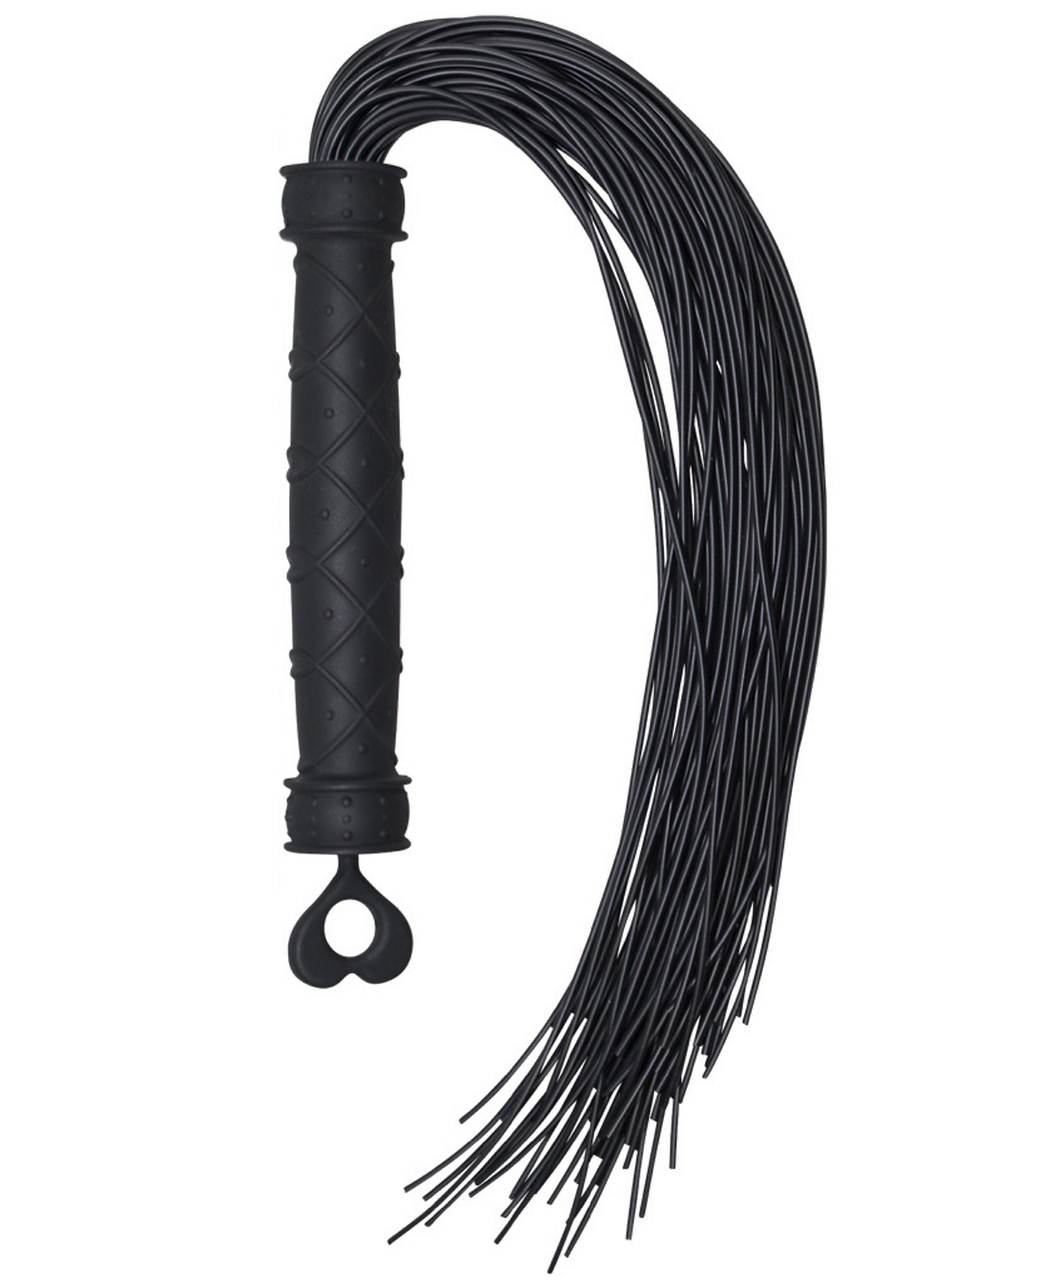 Bad Kitty black silicone whip